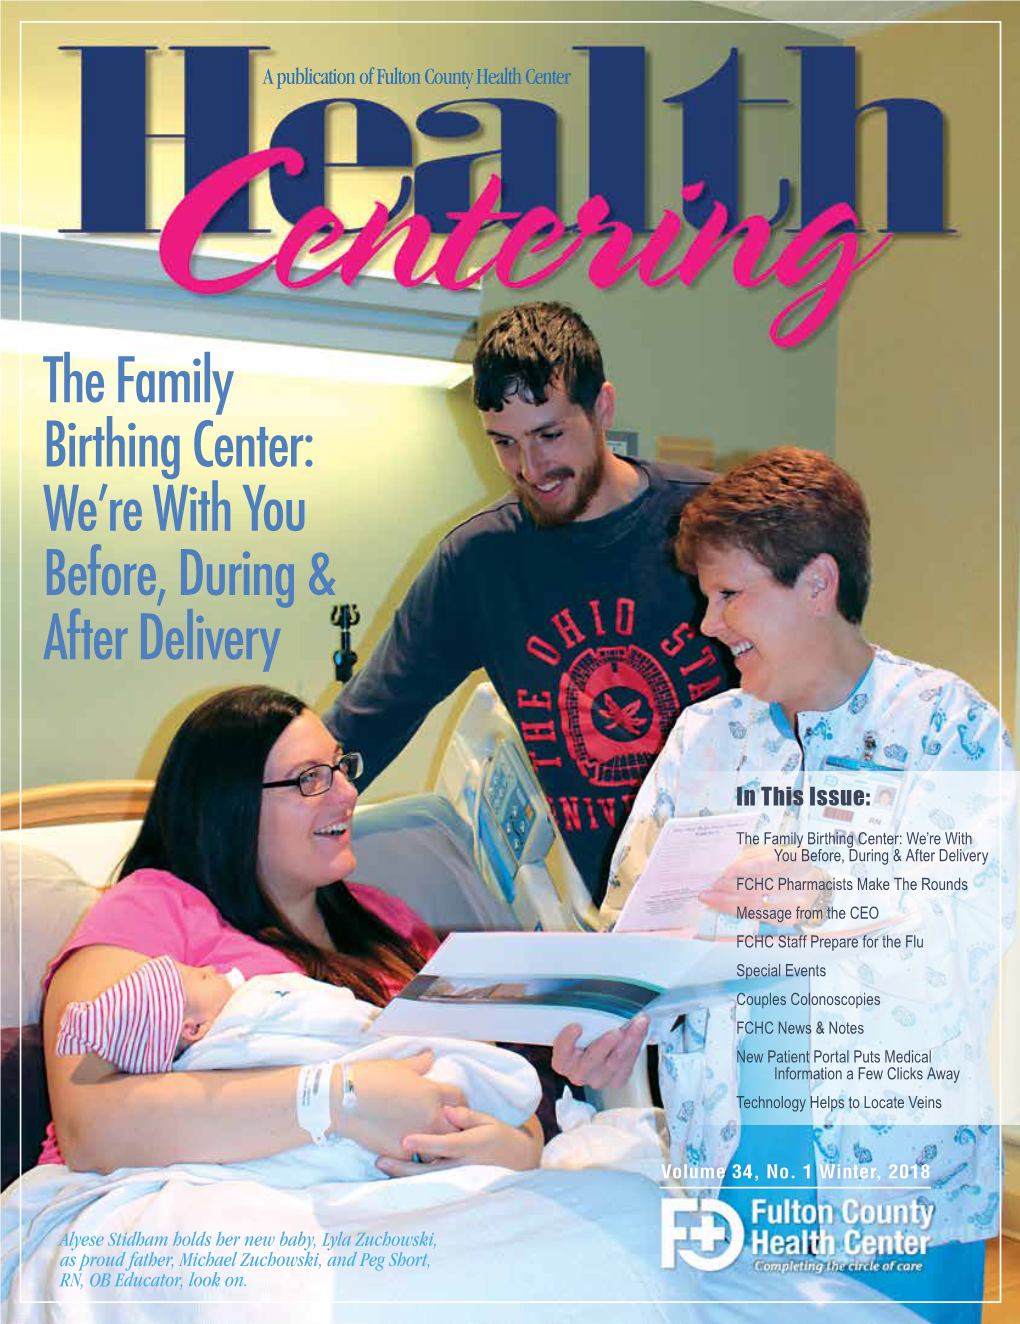 The Family Birthing Center: We’Re with You Before, During & After Delivery